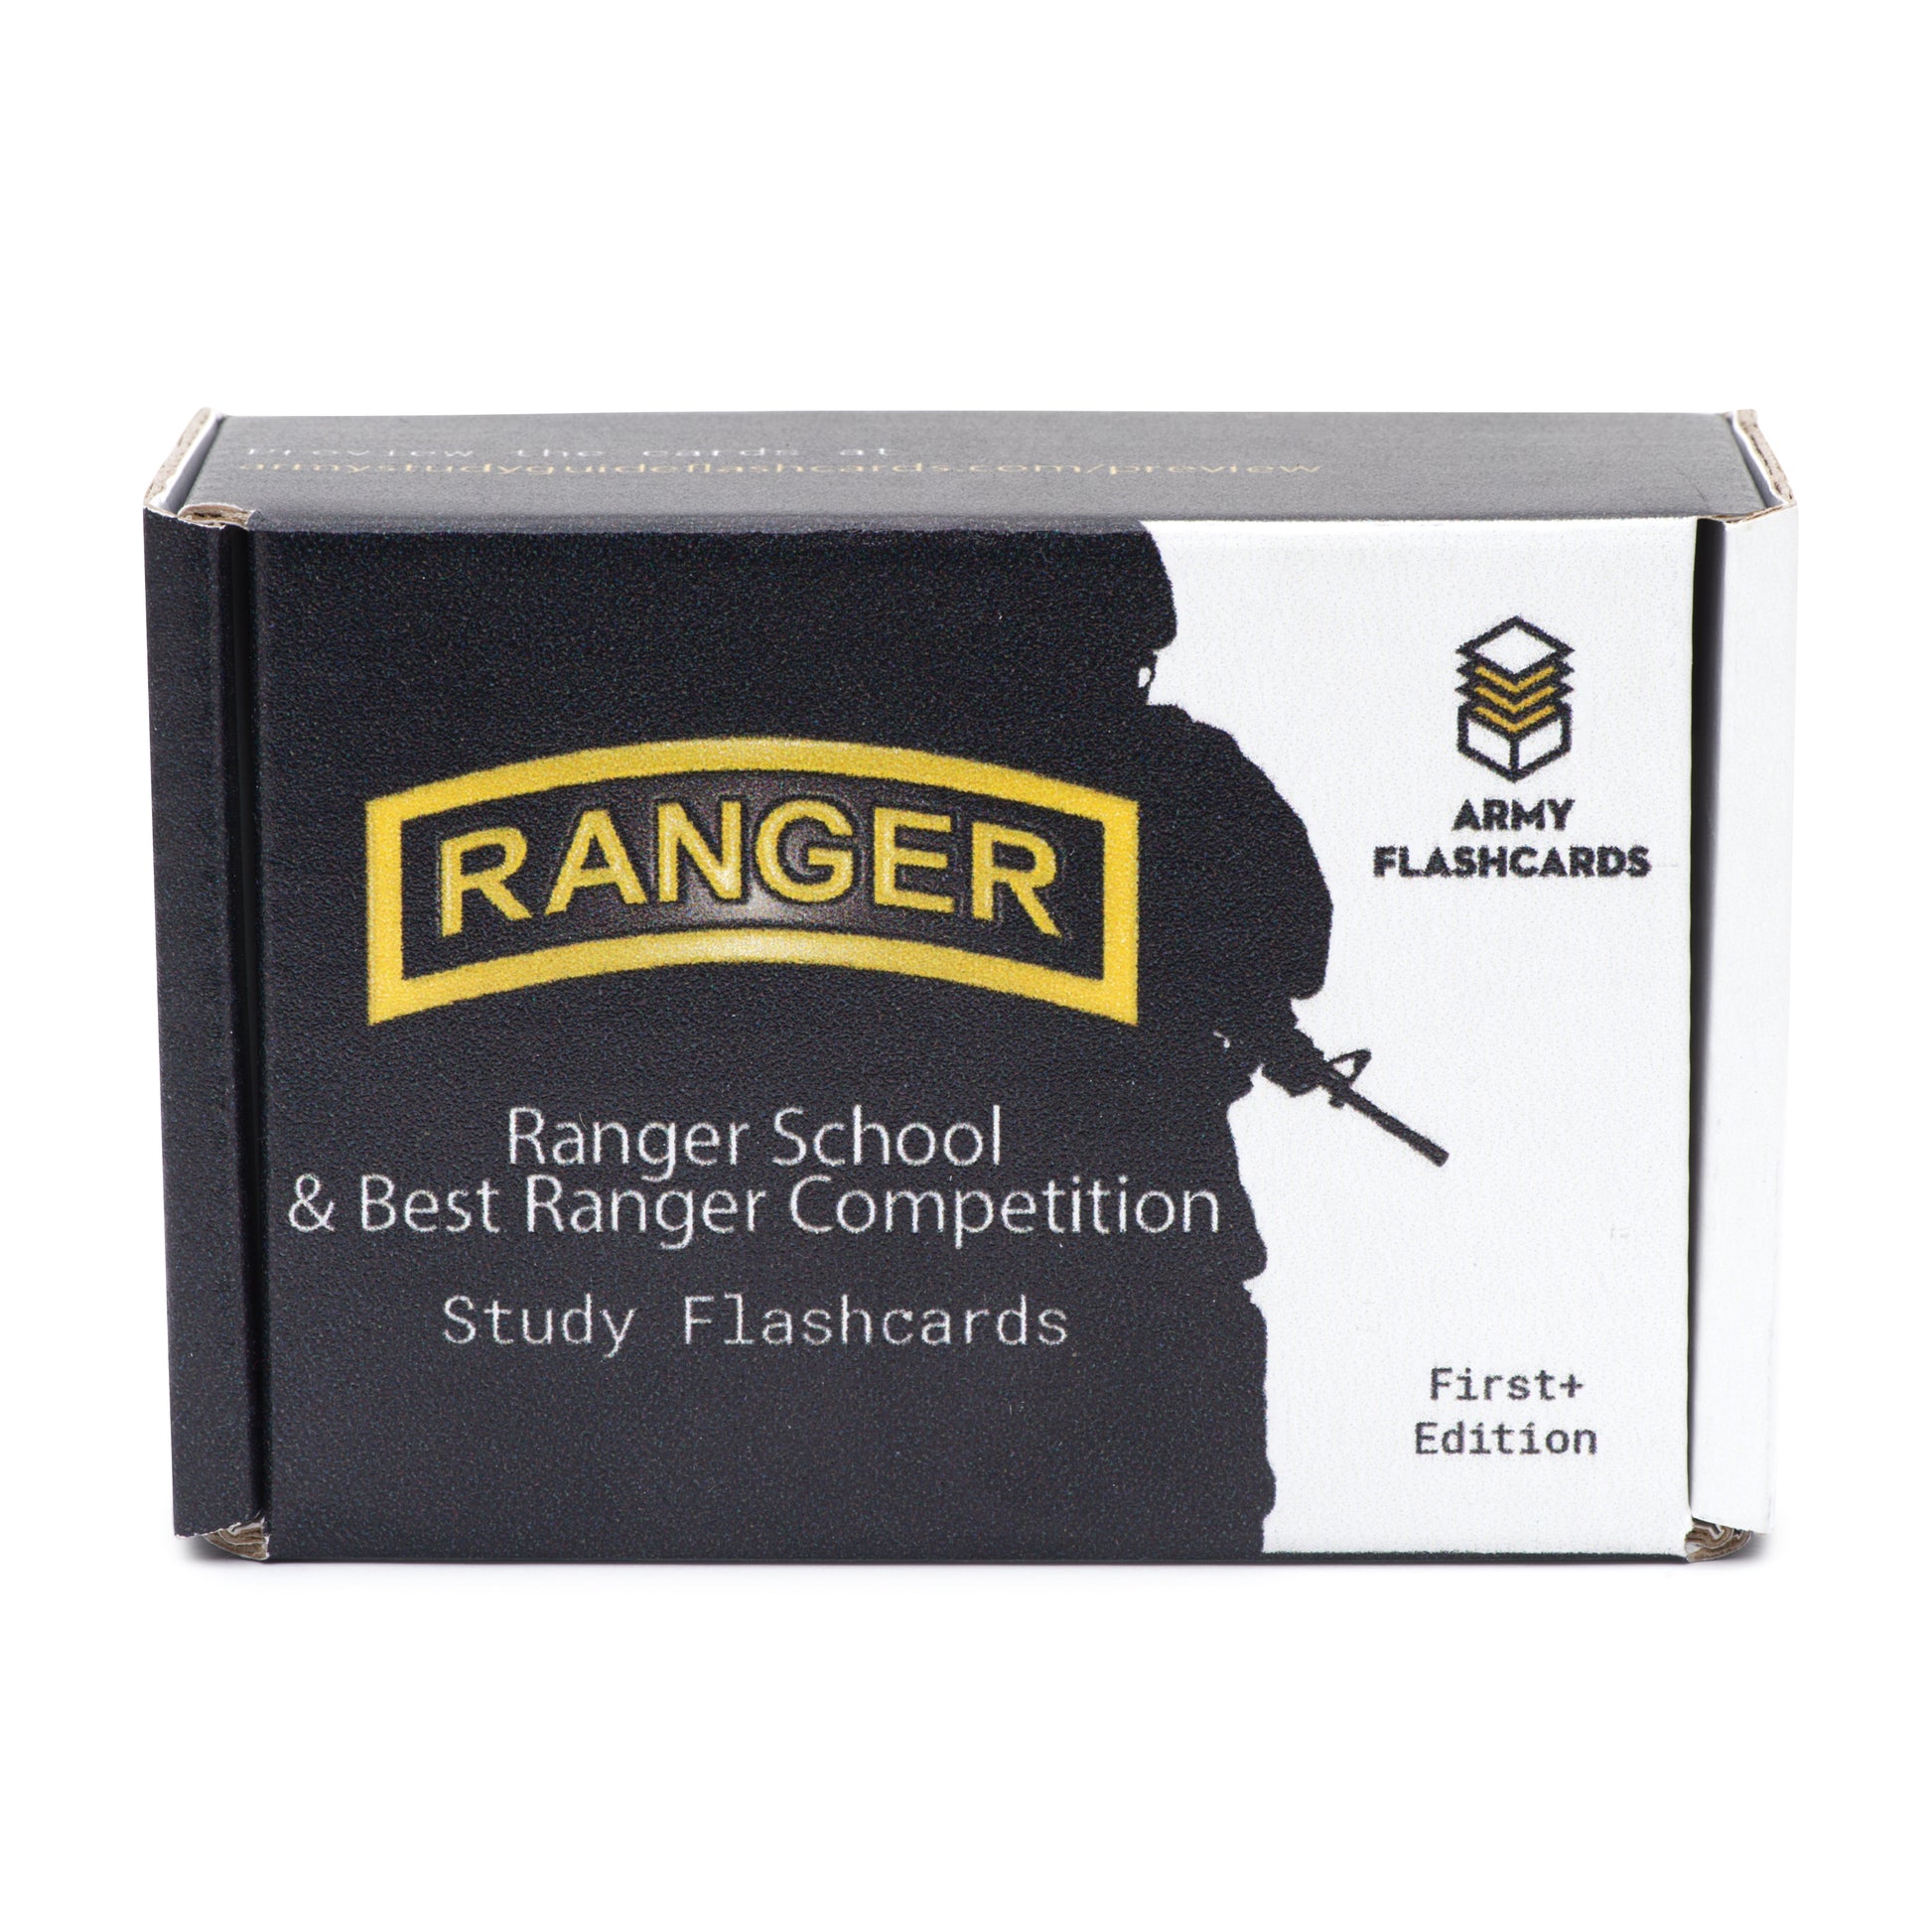 Ranger School / Best Ranger Competition Flashcards - Army Flashcards